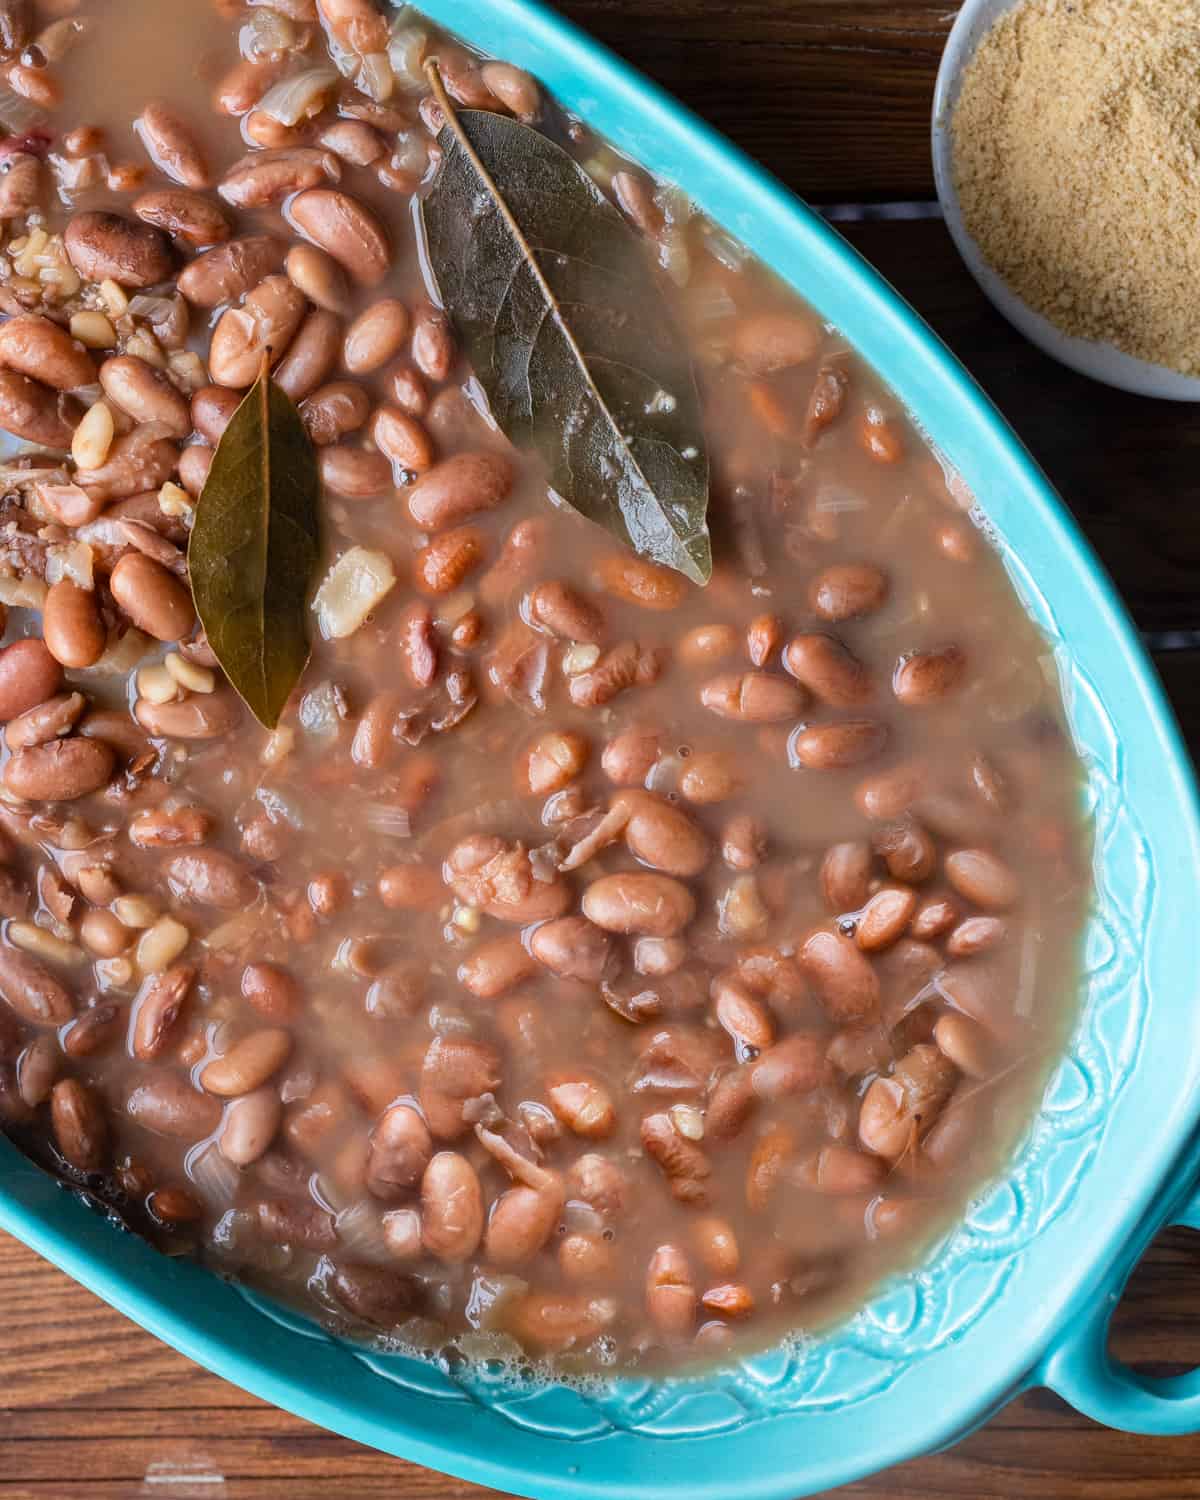 A close-up image showing a traditional Brazilian pinto beans stew with two bay leaves visible, suggesting a hearty and aromatic dish.